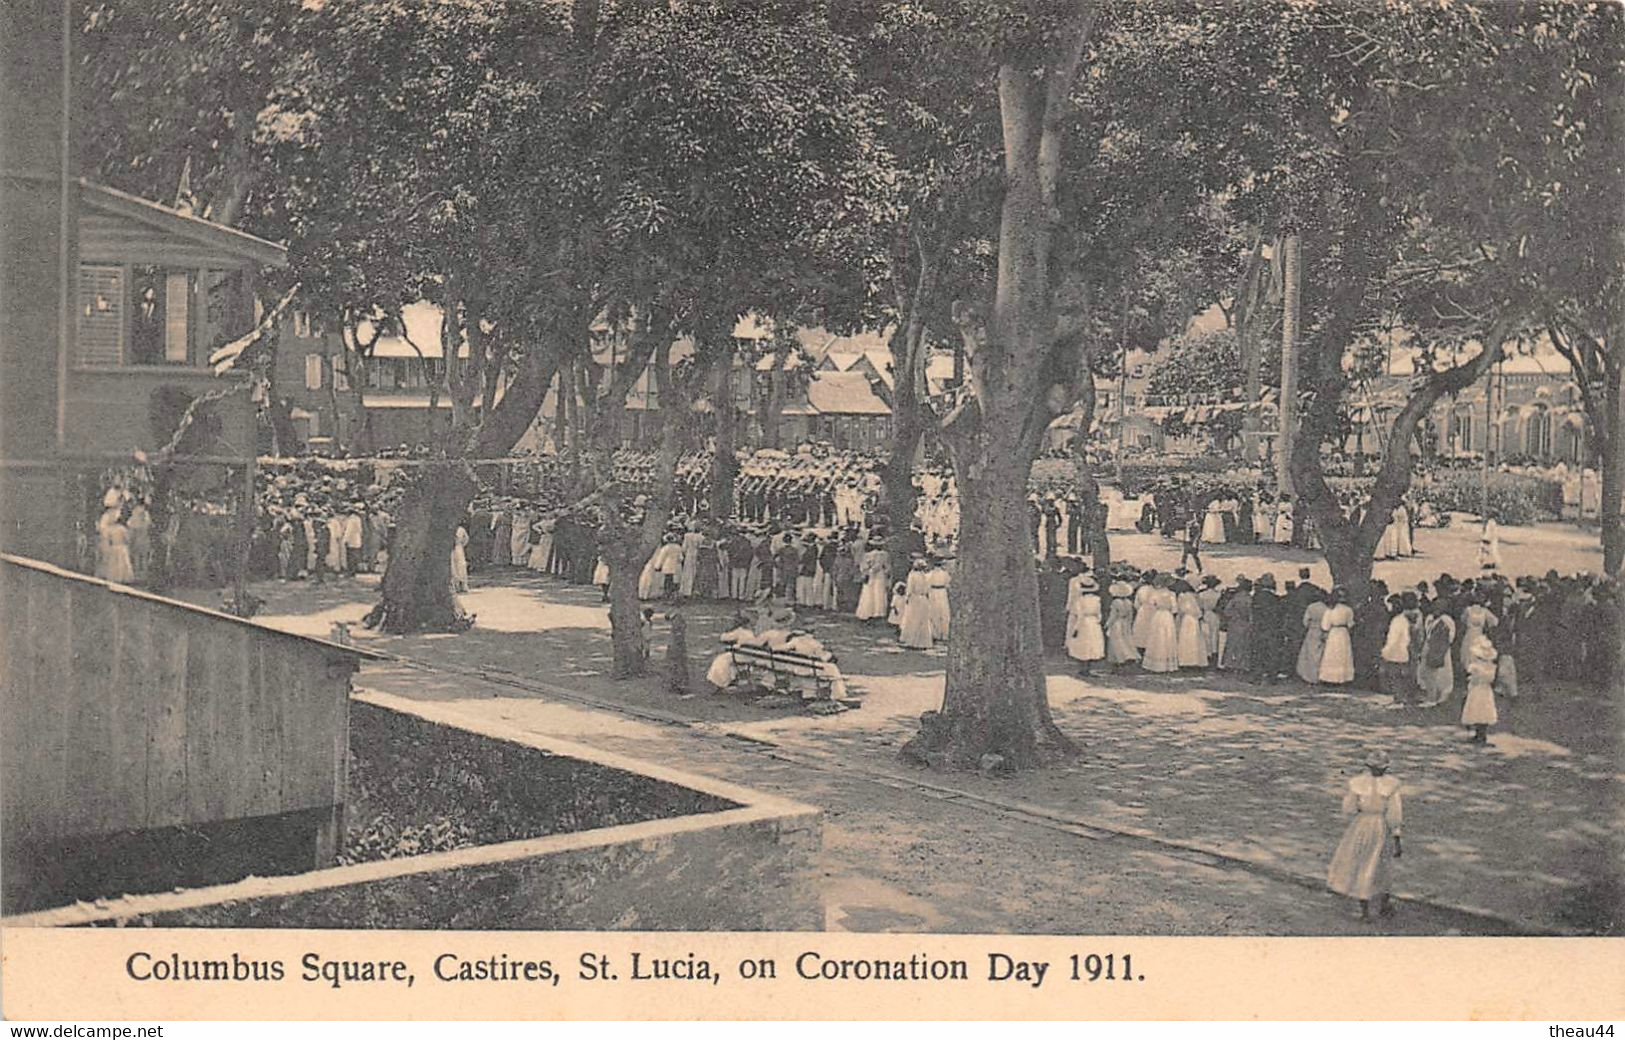 ¤¤  -  SAINTE-LUCIE   -   CASTRIES   -  Colombus Square, On Coronation Day 1911  -  ¤¤ - St. Lucia